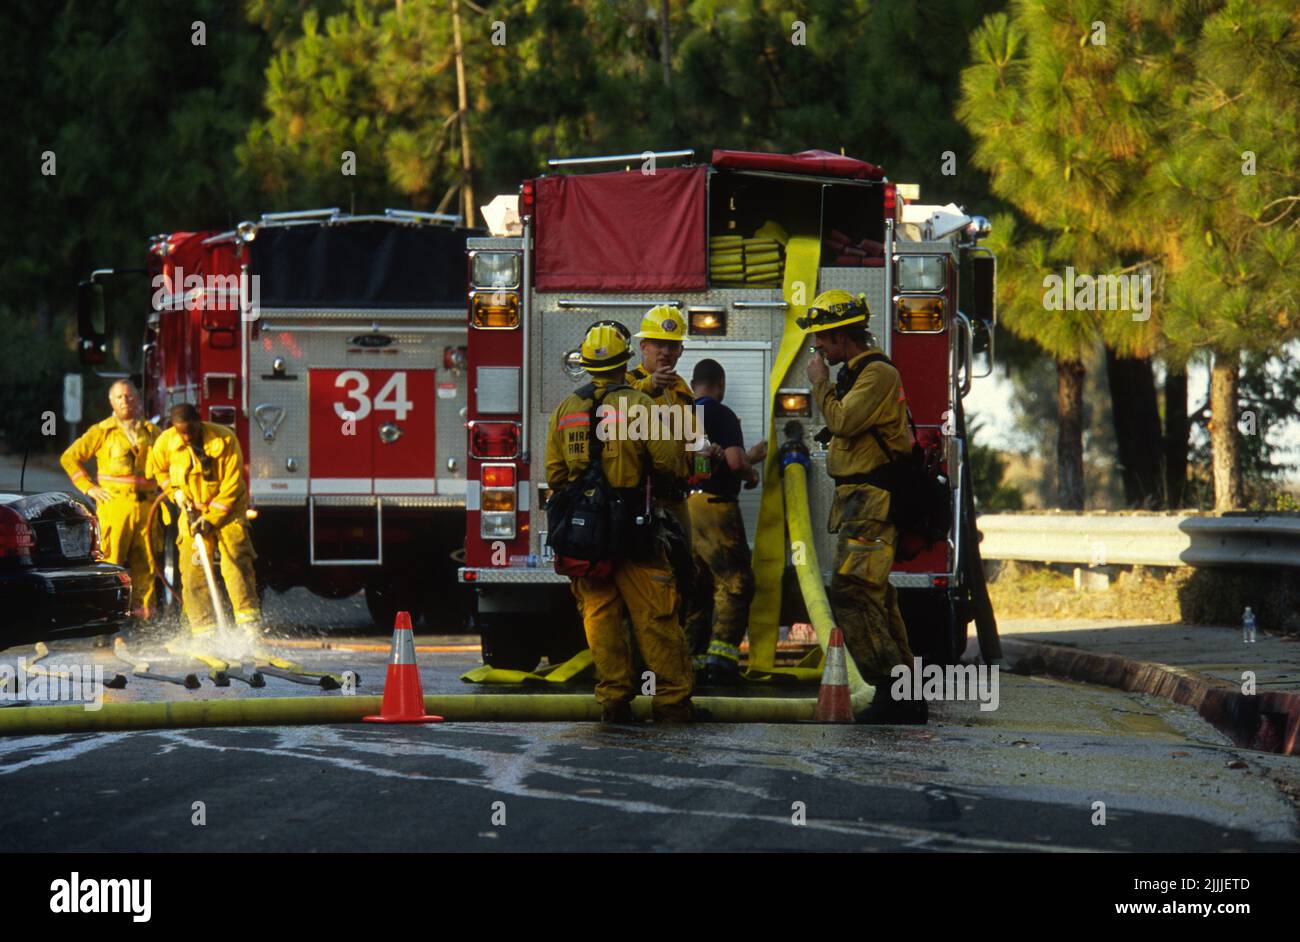 Fire crews cleaning gear after a Mission Gorge brush fire Stock Photo